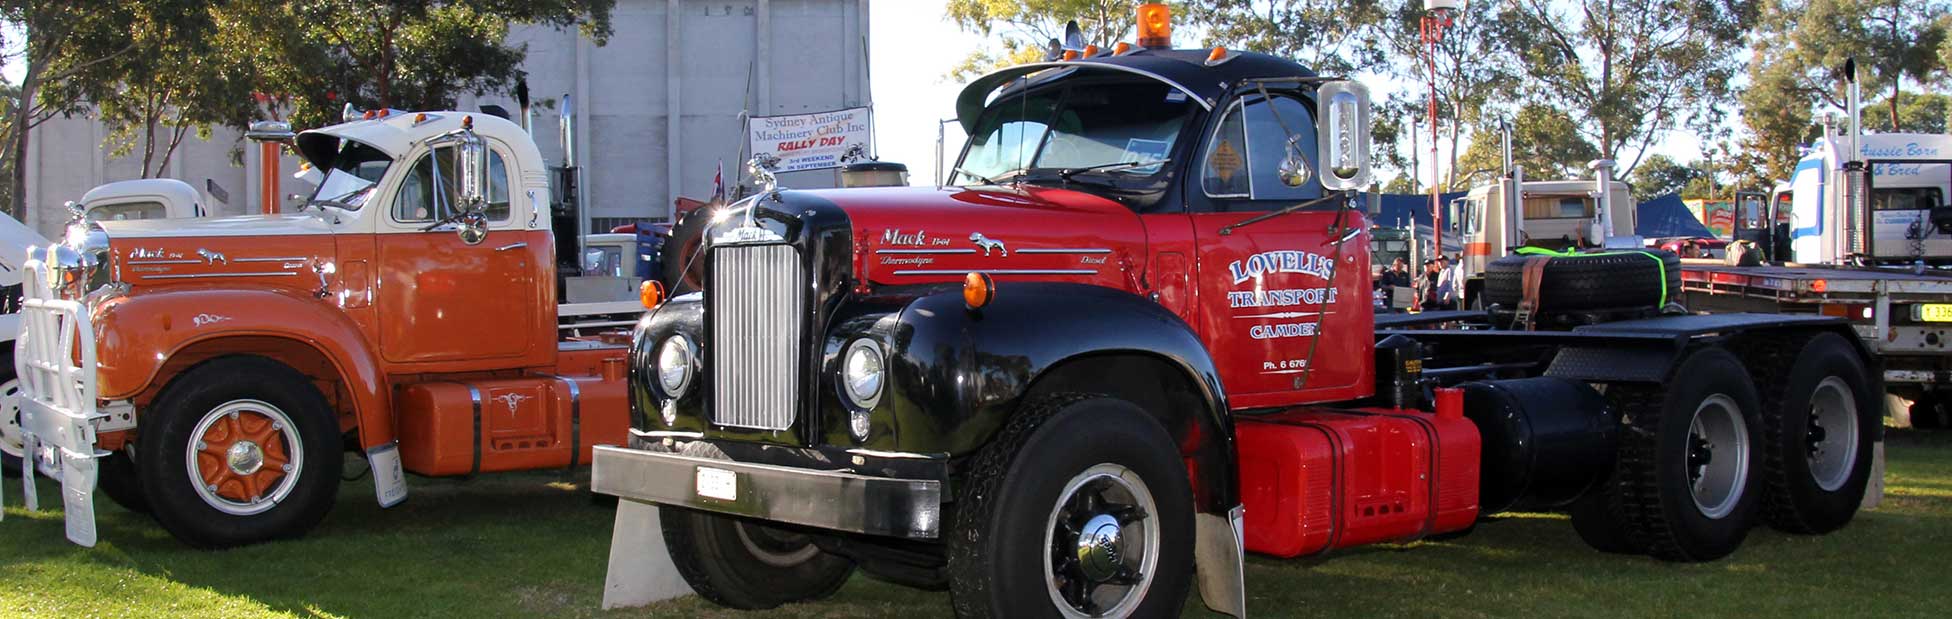 Red vintage truck on display in front of Museum of Fire